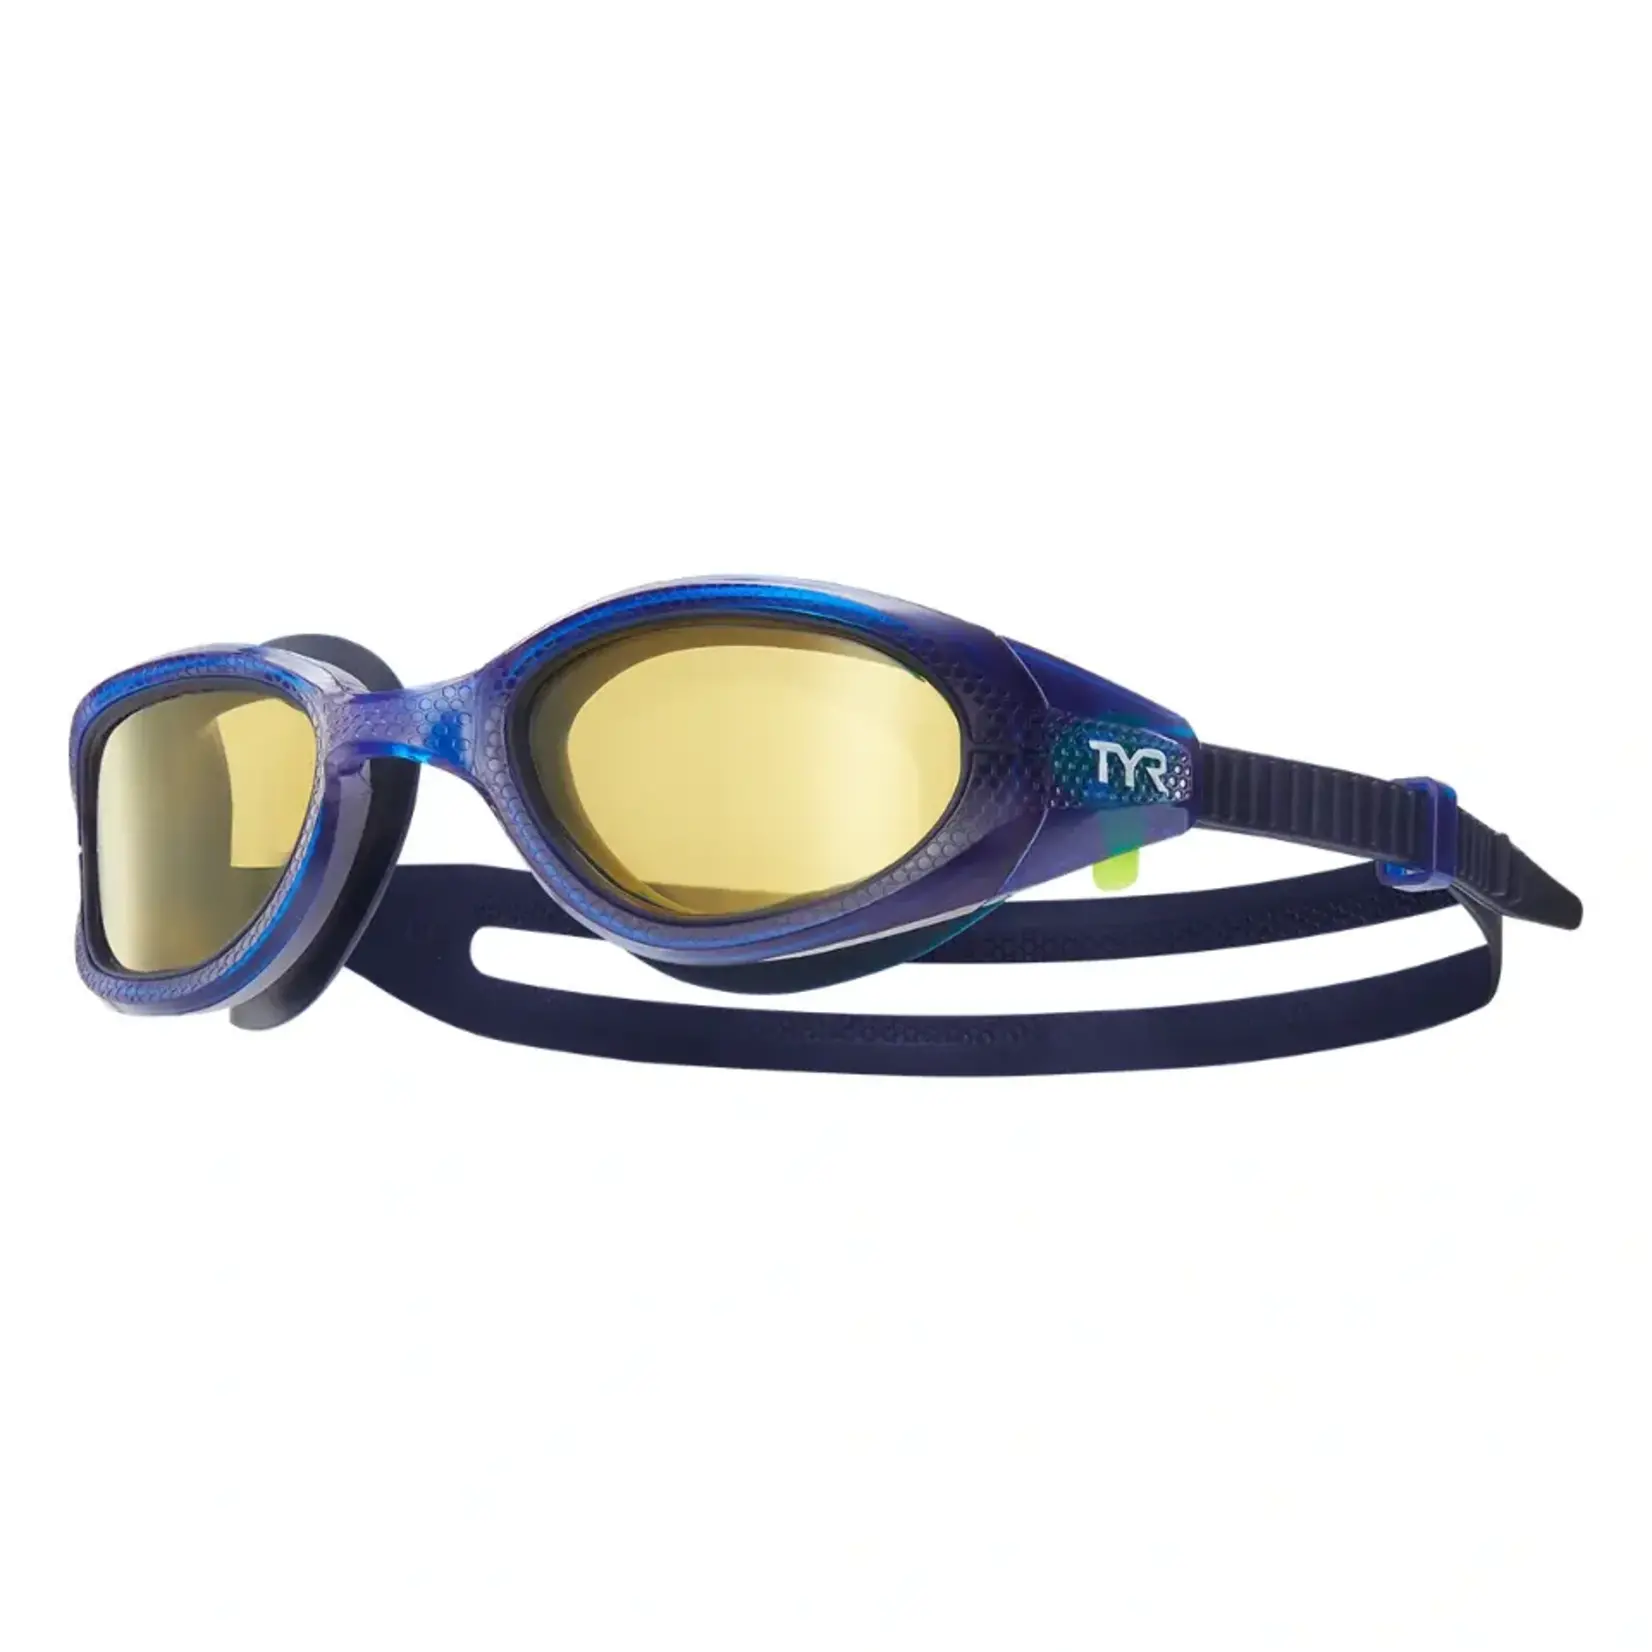 TYR TYR SPECIAL OPS 3.0 - POLARIZED NON-MIRRORED